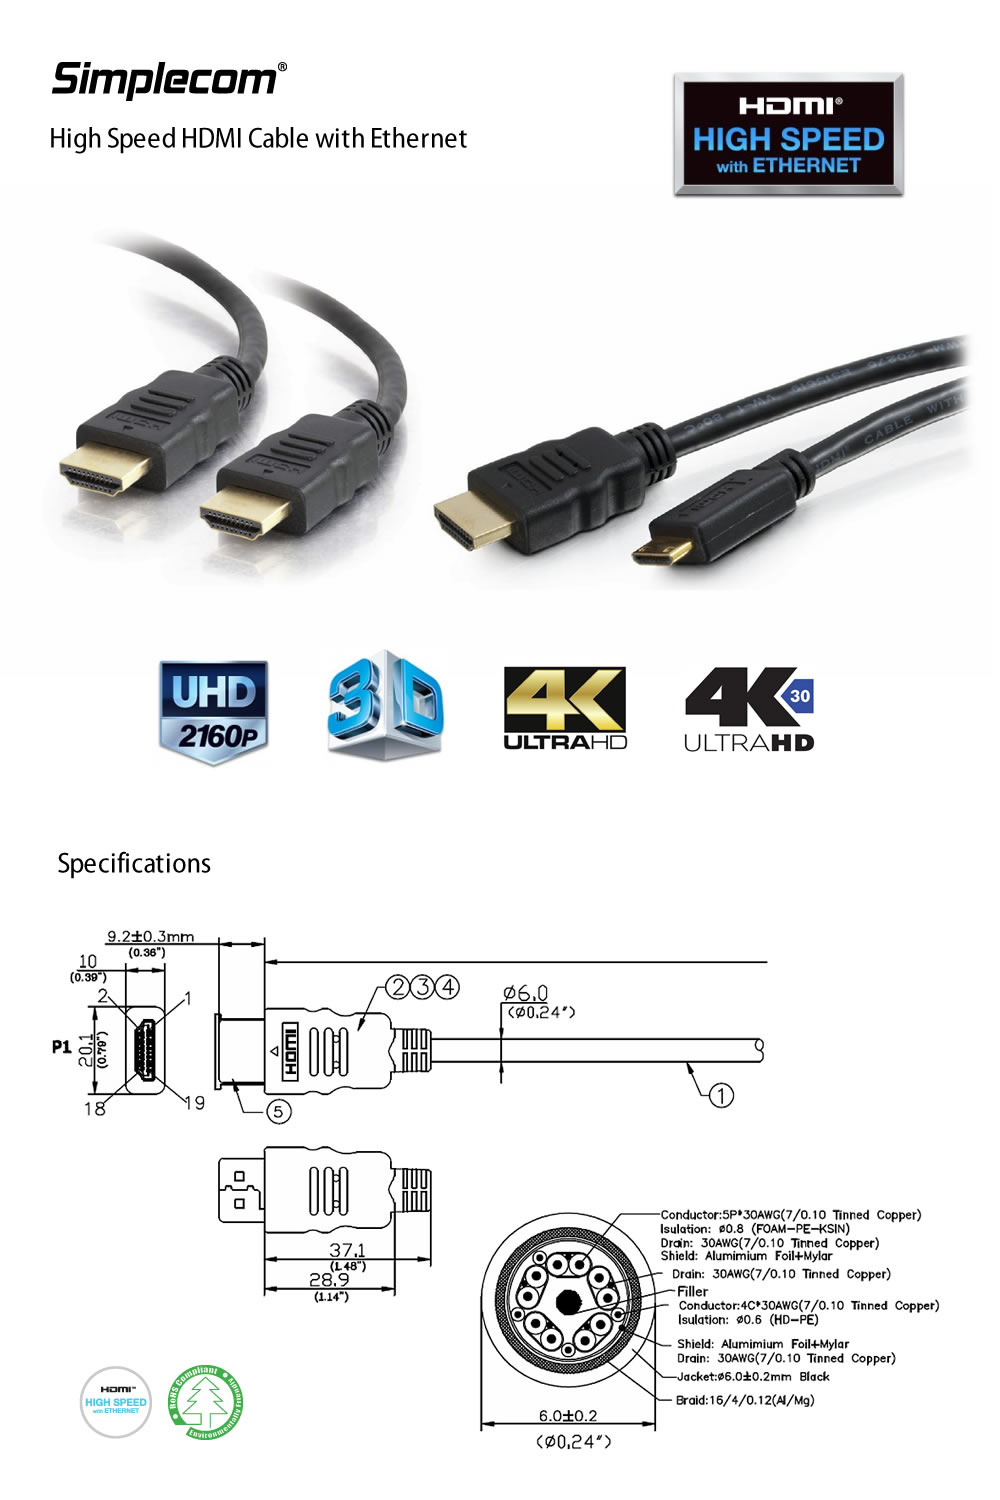 HDMI-Cables-Simplecom-CAH410-High-Speed-HDMI-Cable-with-Ethernet-1m-1